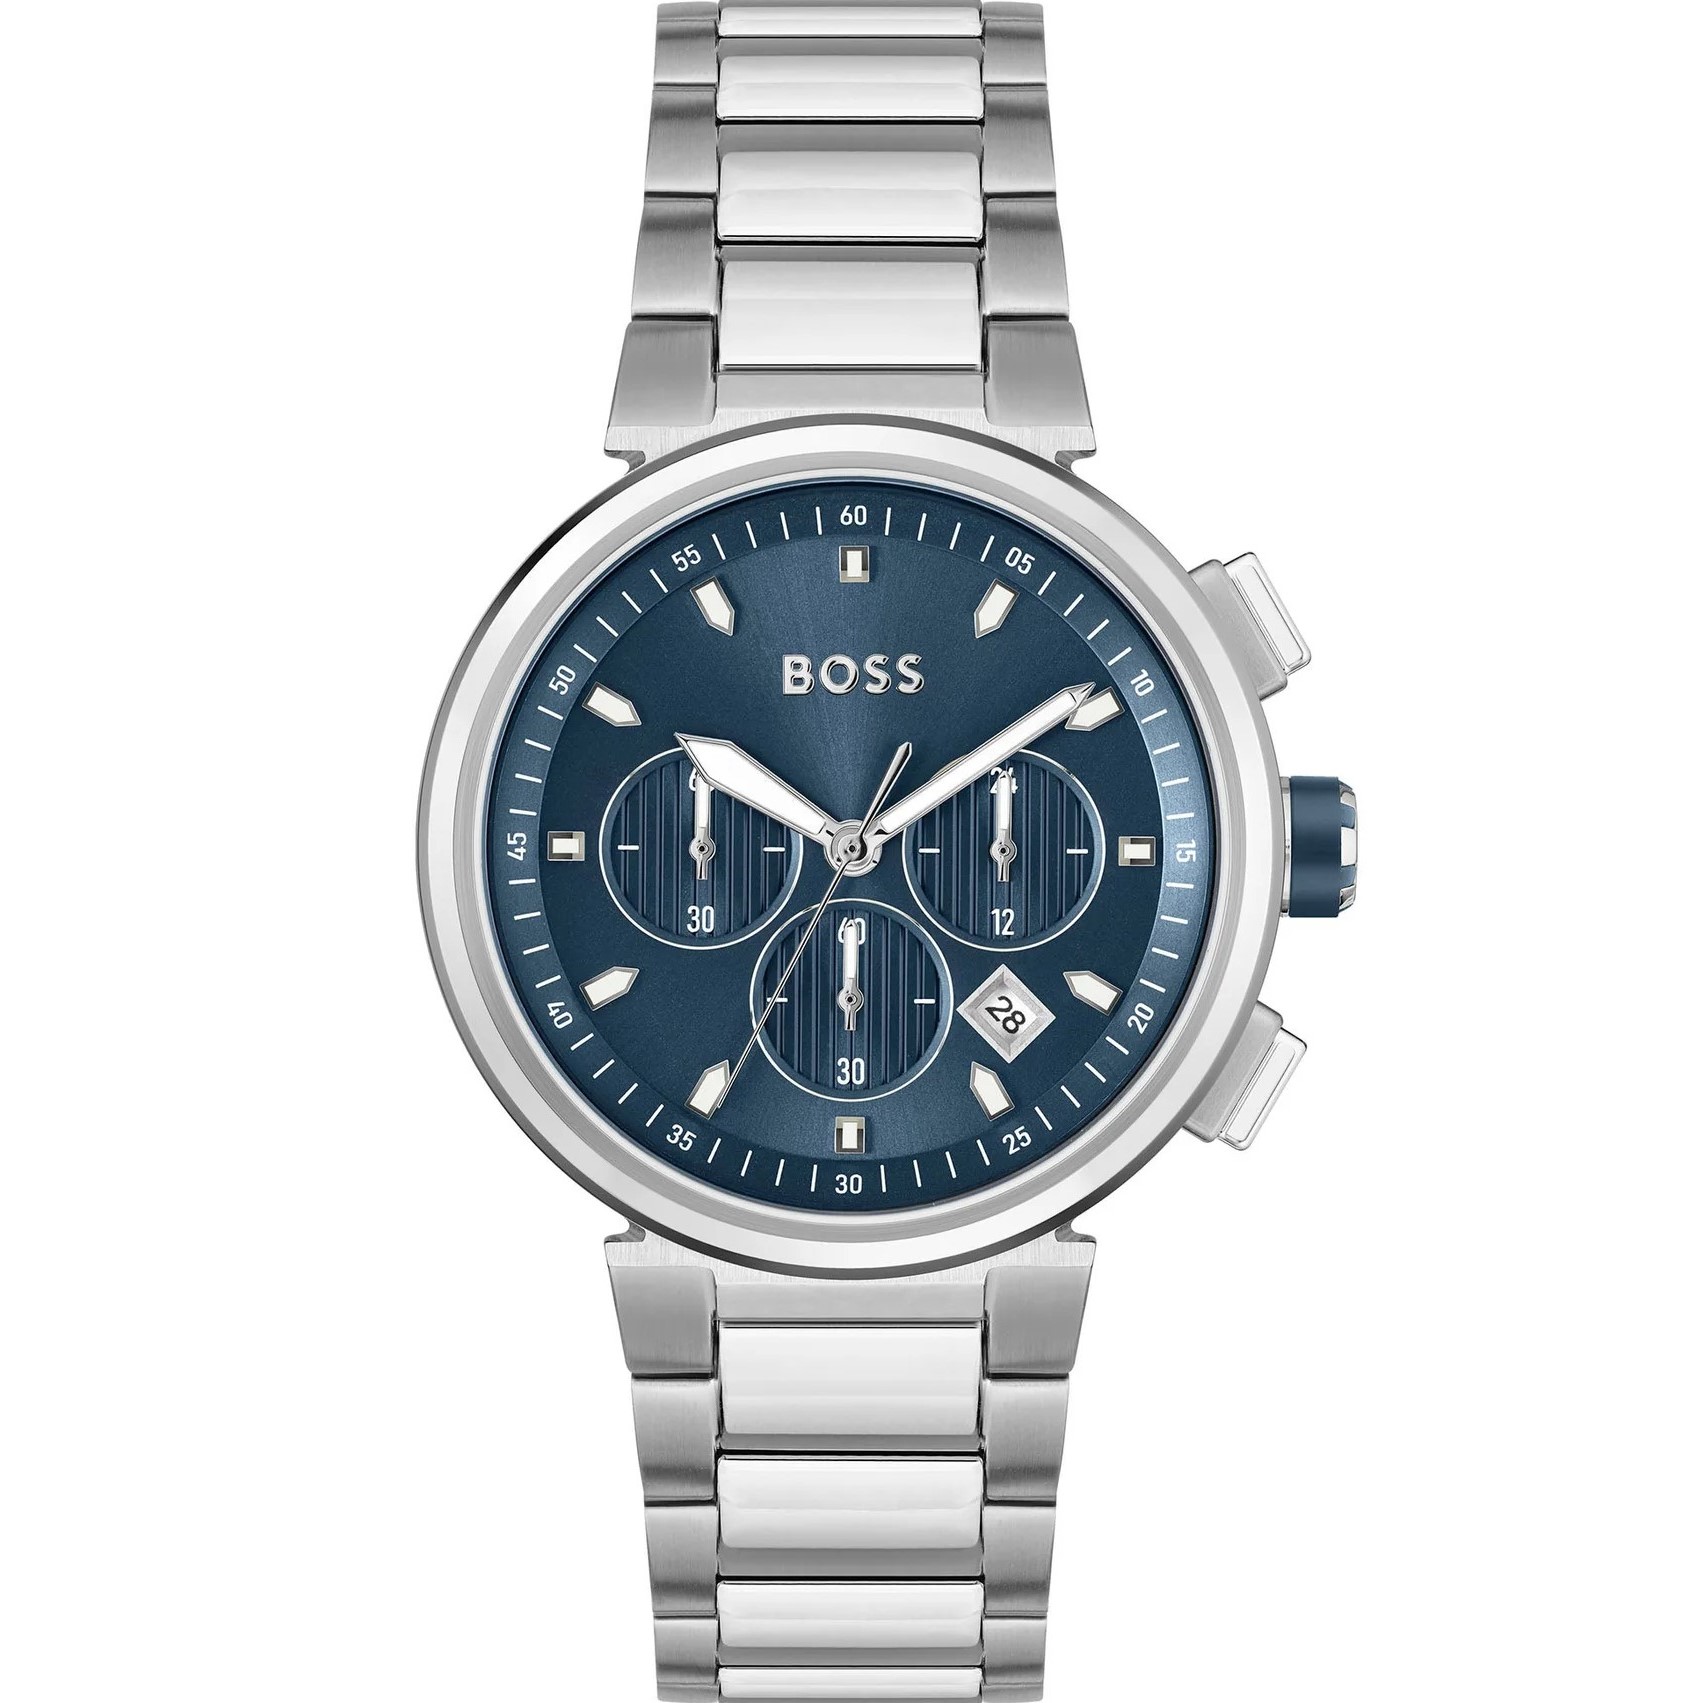 ĐỒNG HỒ NAM HUGO BOSS STAINLESS STEEL BLUE DIAL CHRONOGRAPH MENS WATCH 1513999 6